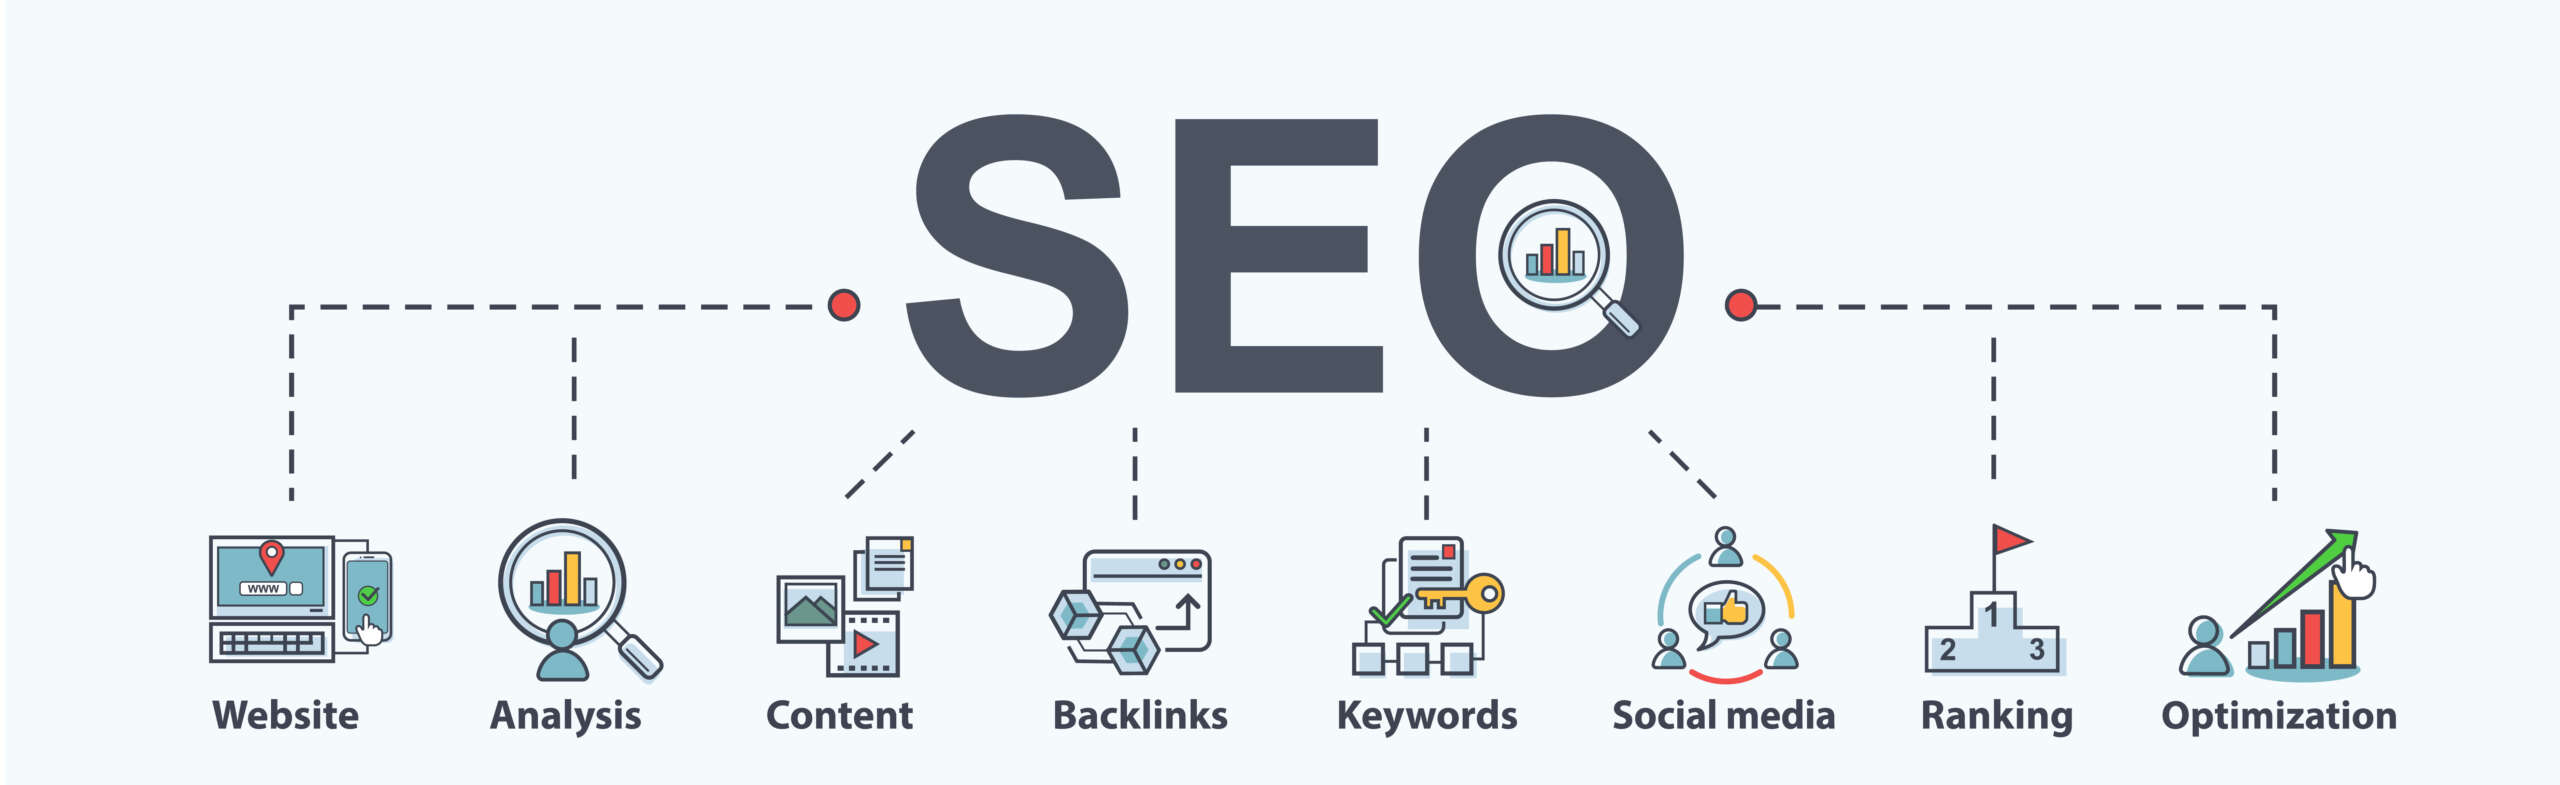 SEO search engine optimization banner web icon for business and marketing, traffic, ranking, optimization, link and keyword